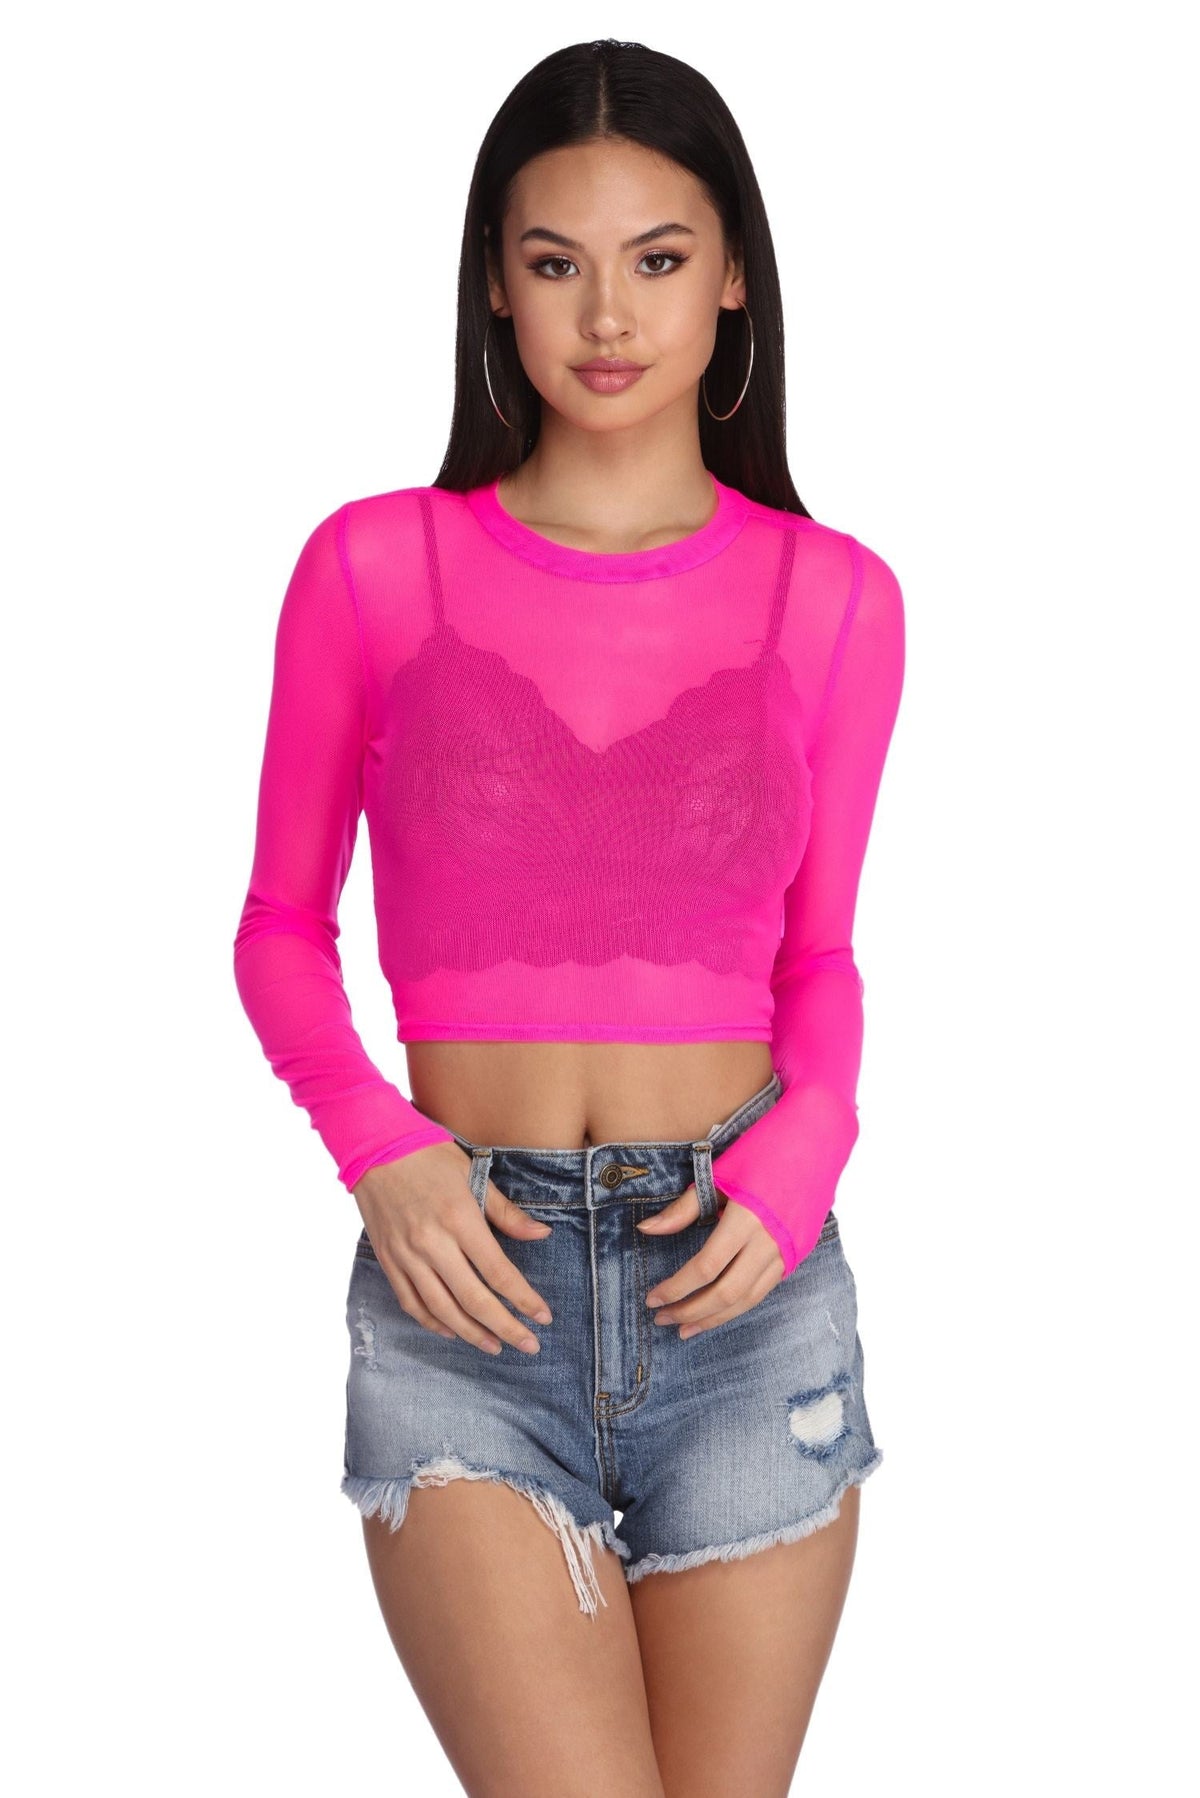 Mesh With The Best Crop Top - Lady Occasions